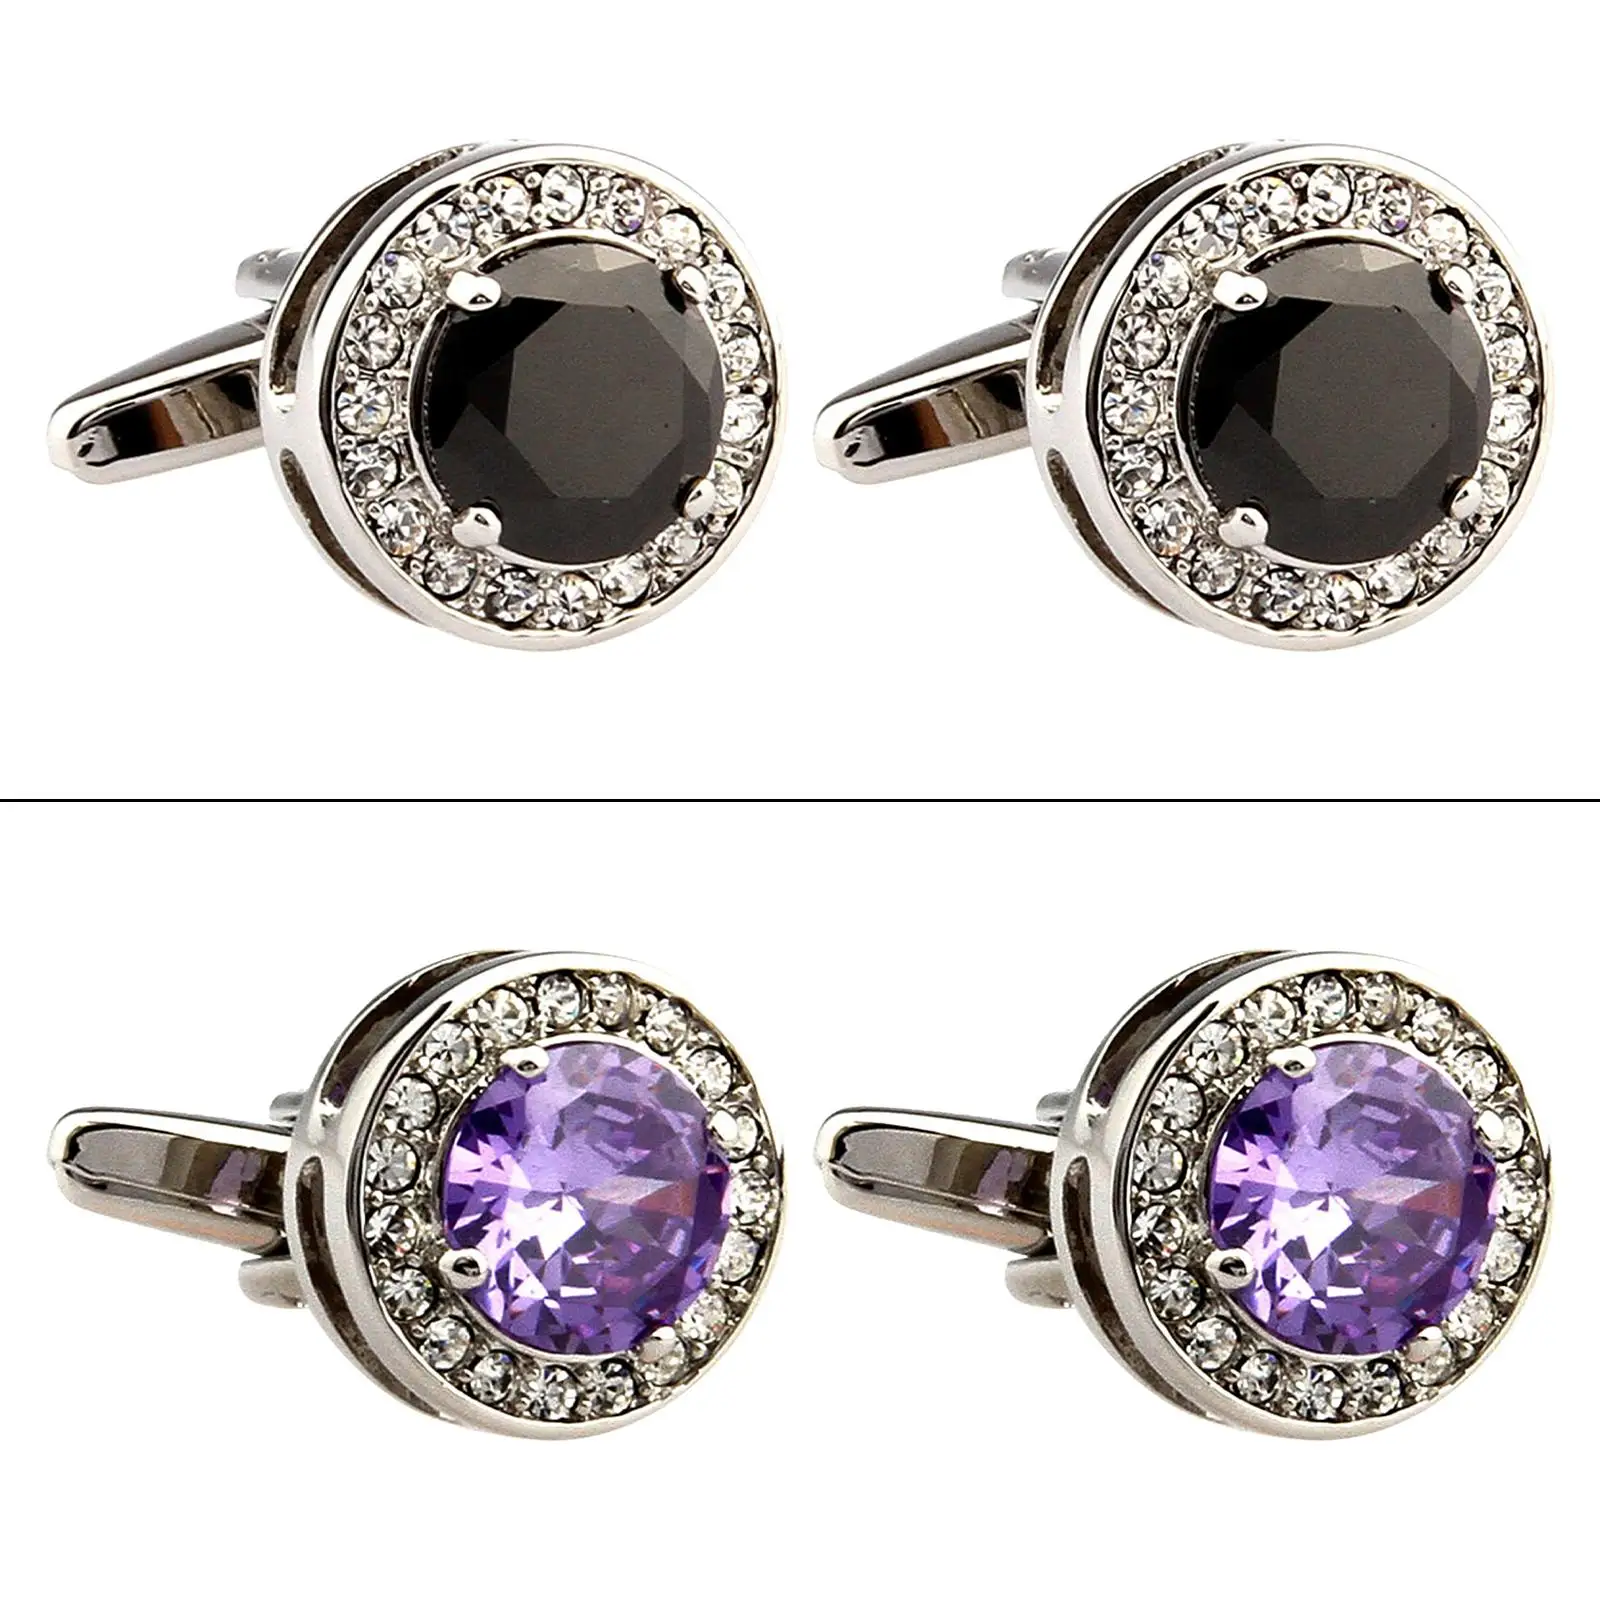 Classic Mens Cufflinks Crystal for Wedding Anniversary Gifts Cocktail Party